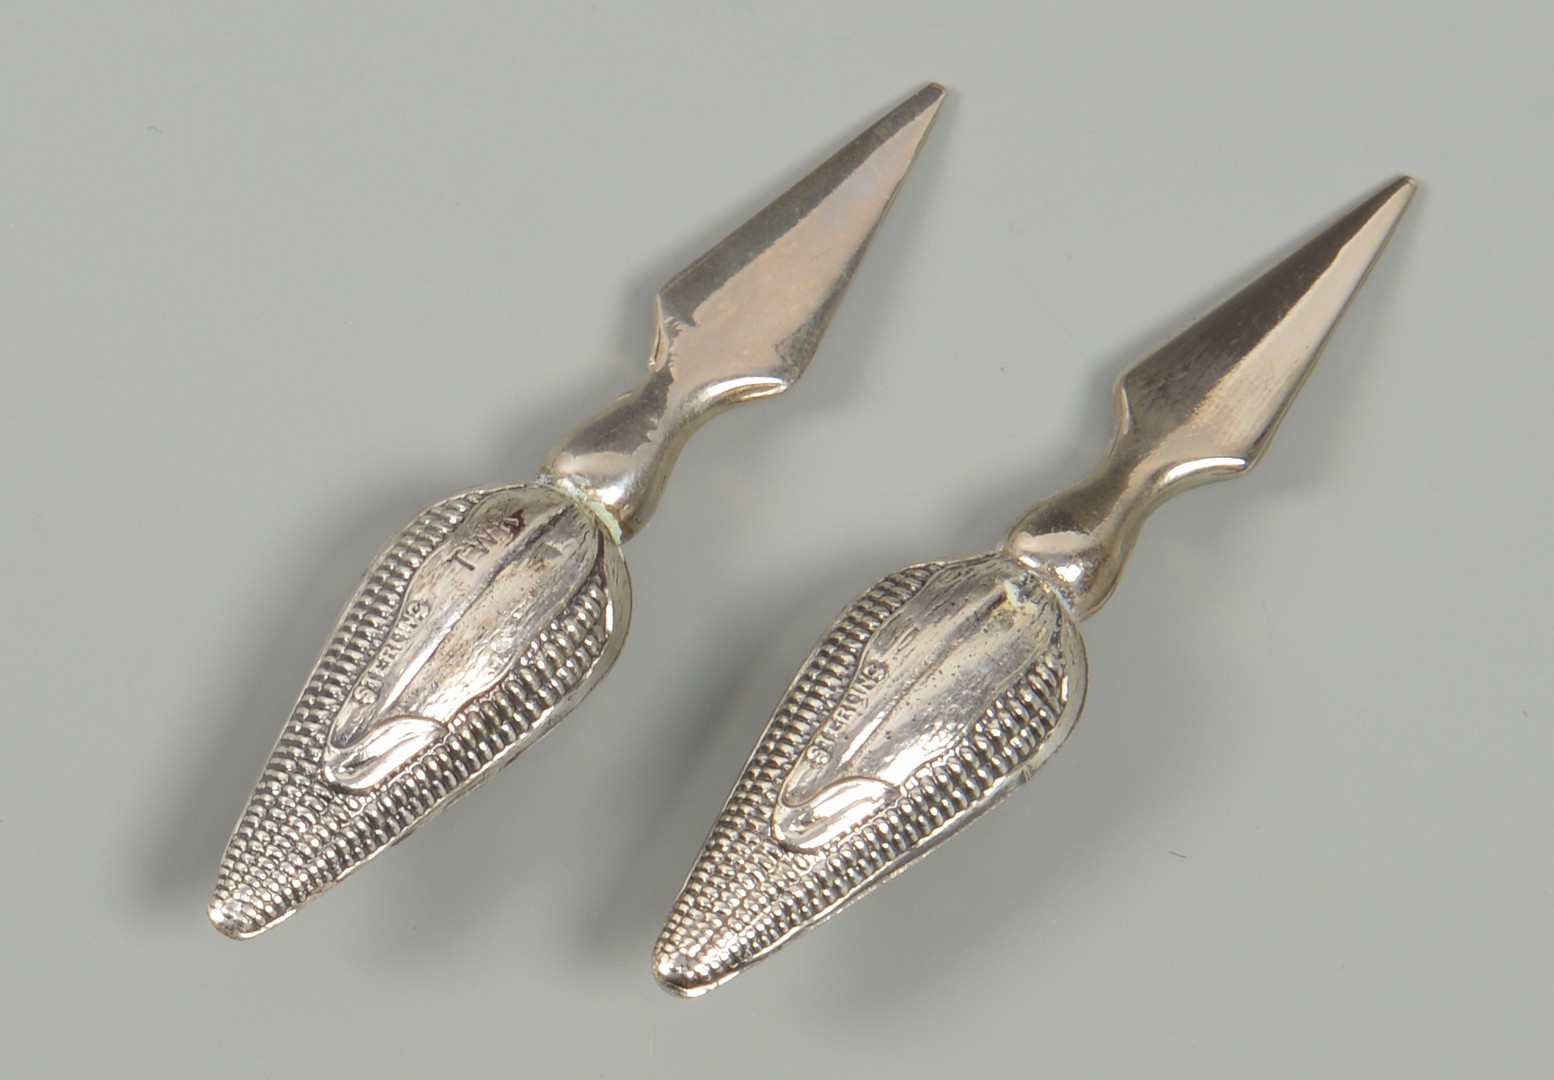 Lot 961: Sterling Candy dishes, Corn Holders